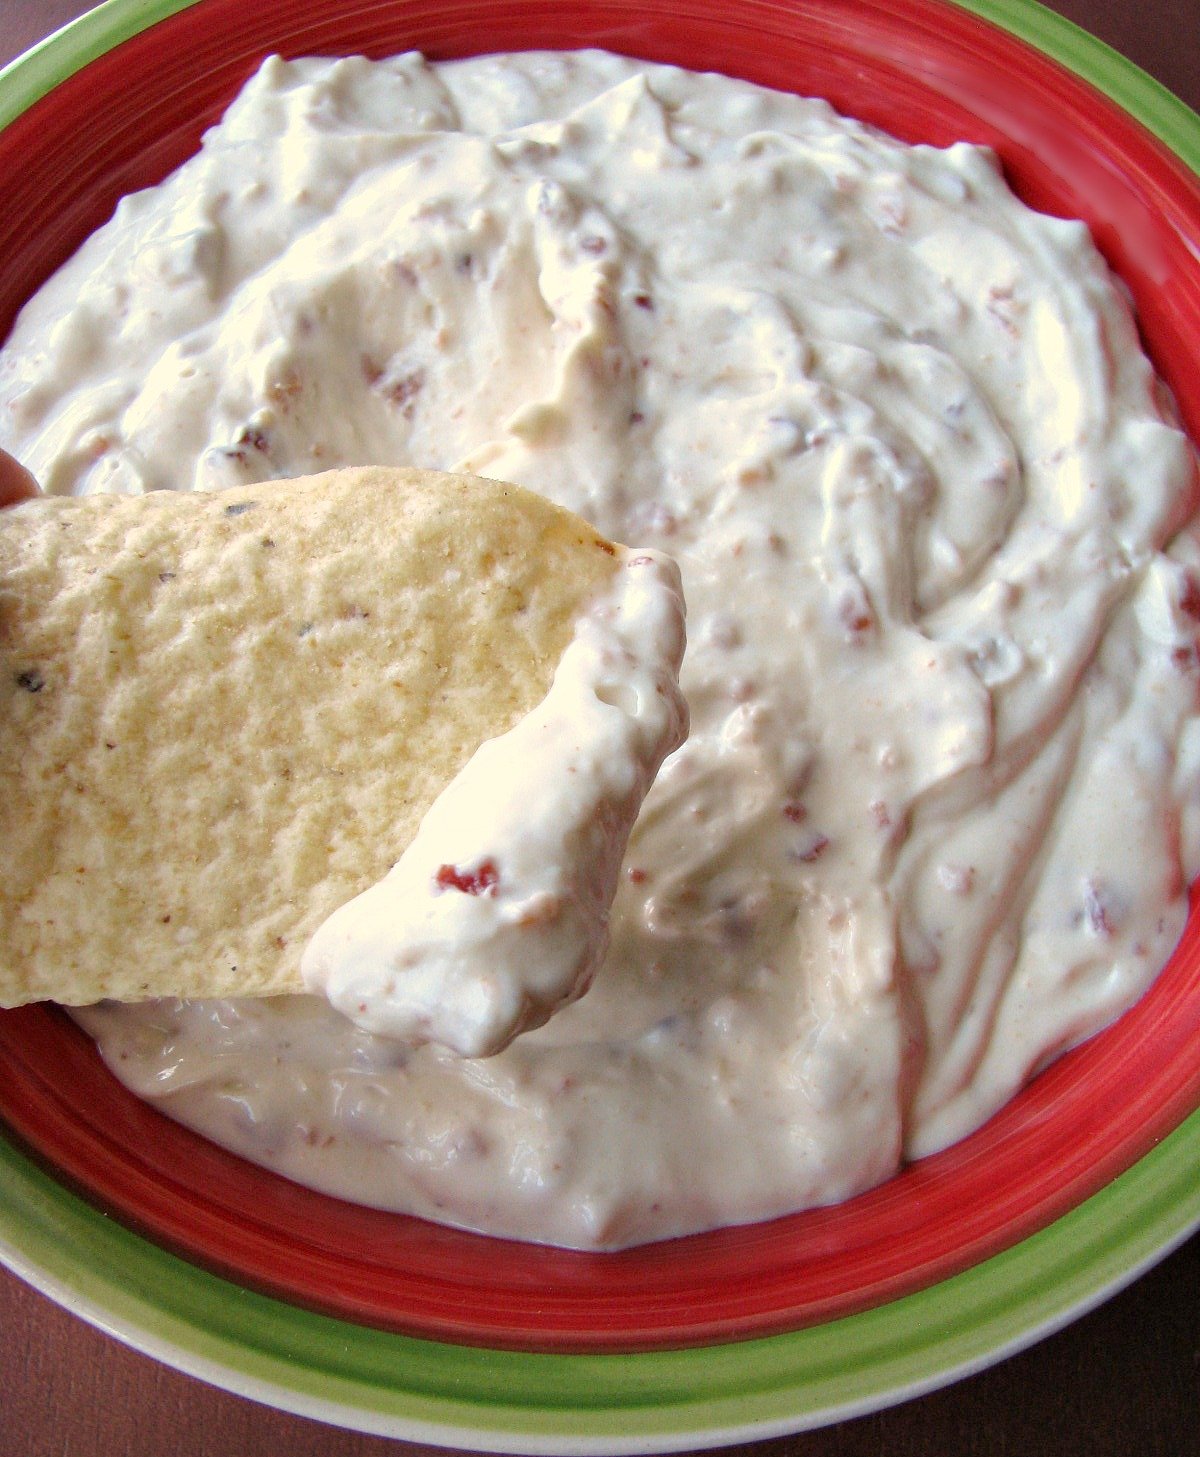 Homemade Bacon Horseradish Dip that tastes just like the popular brand! Made with real bacon, horseradish sauce, and sour cream, it's easy to make and full of flavor. 